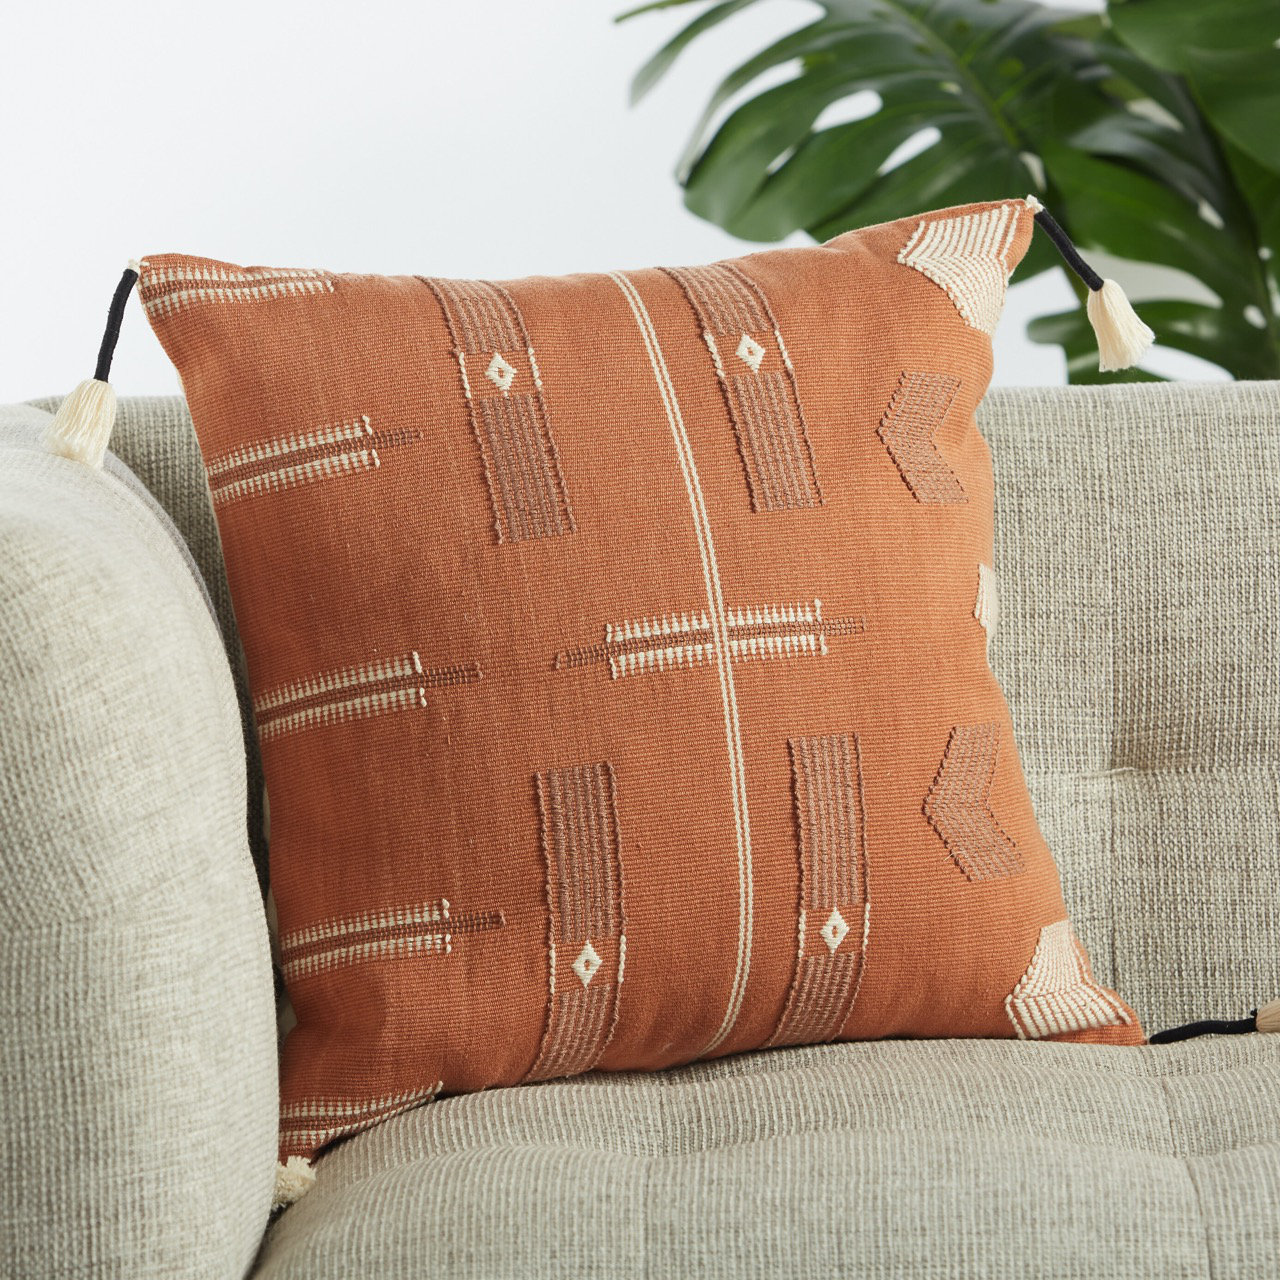 Best-Selling Accent Pillows